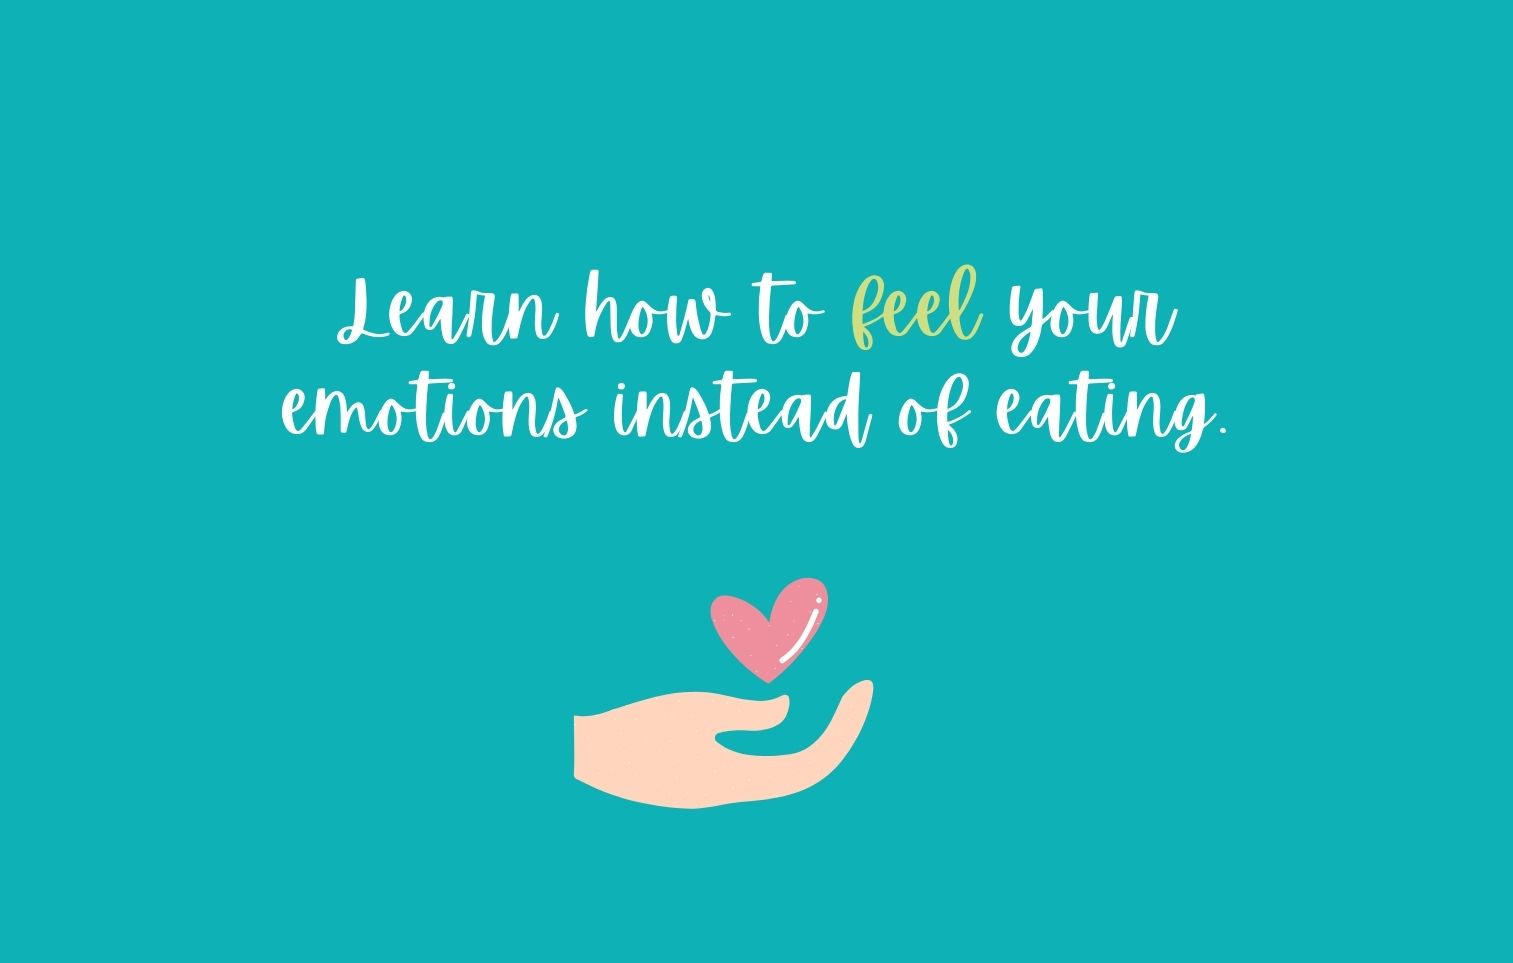 Learn how to feel your emotions instead of eating - quote block